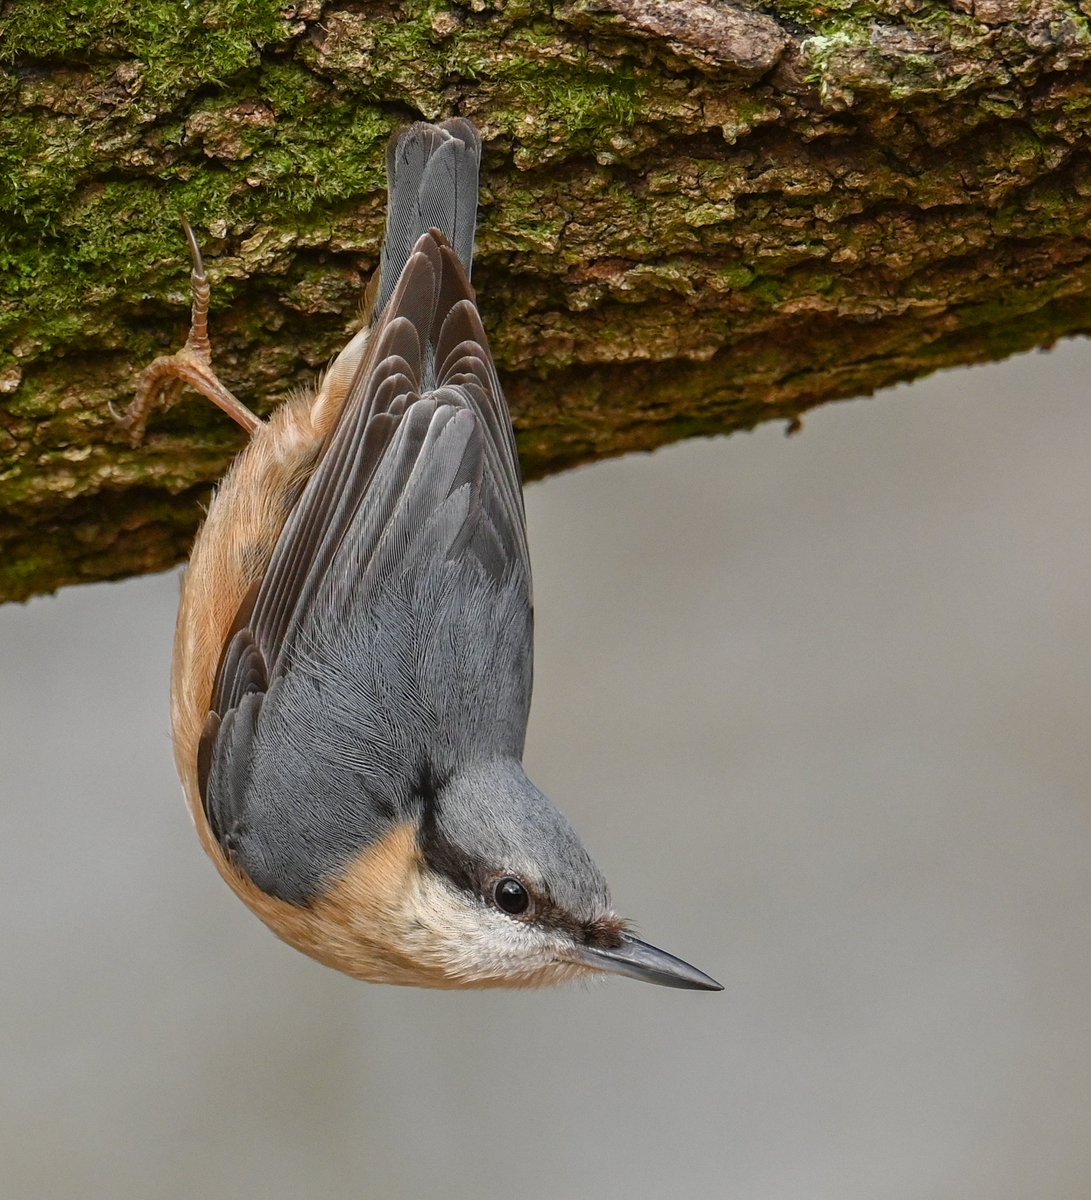 Caught in a split second 🥰
A busy little Nuthatch flitting among the trees ❤️ A great time spent among nature 🐦 #nuthatch #birds #bird #birdwatching #birdconservation #bbccountryfilemagpotd #BBCWildlifePOTD